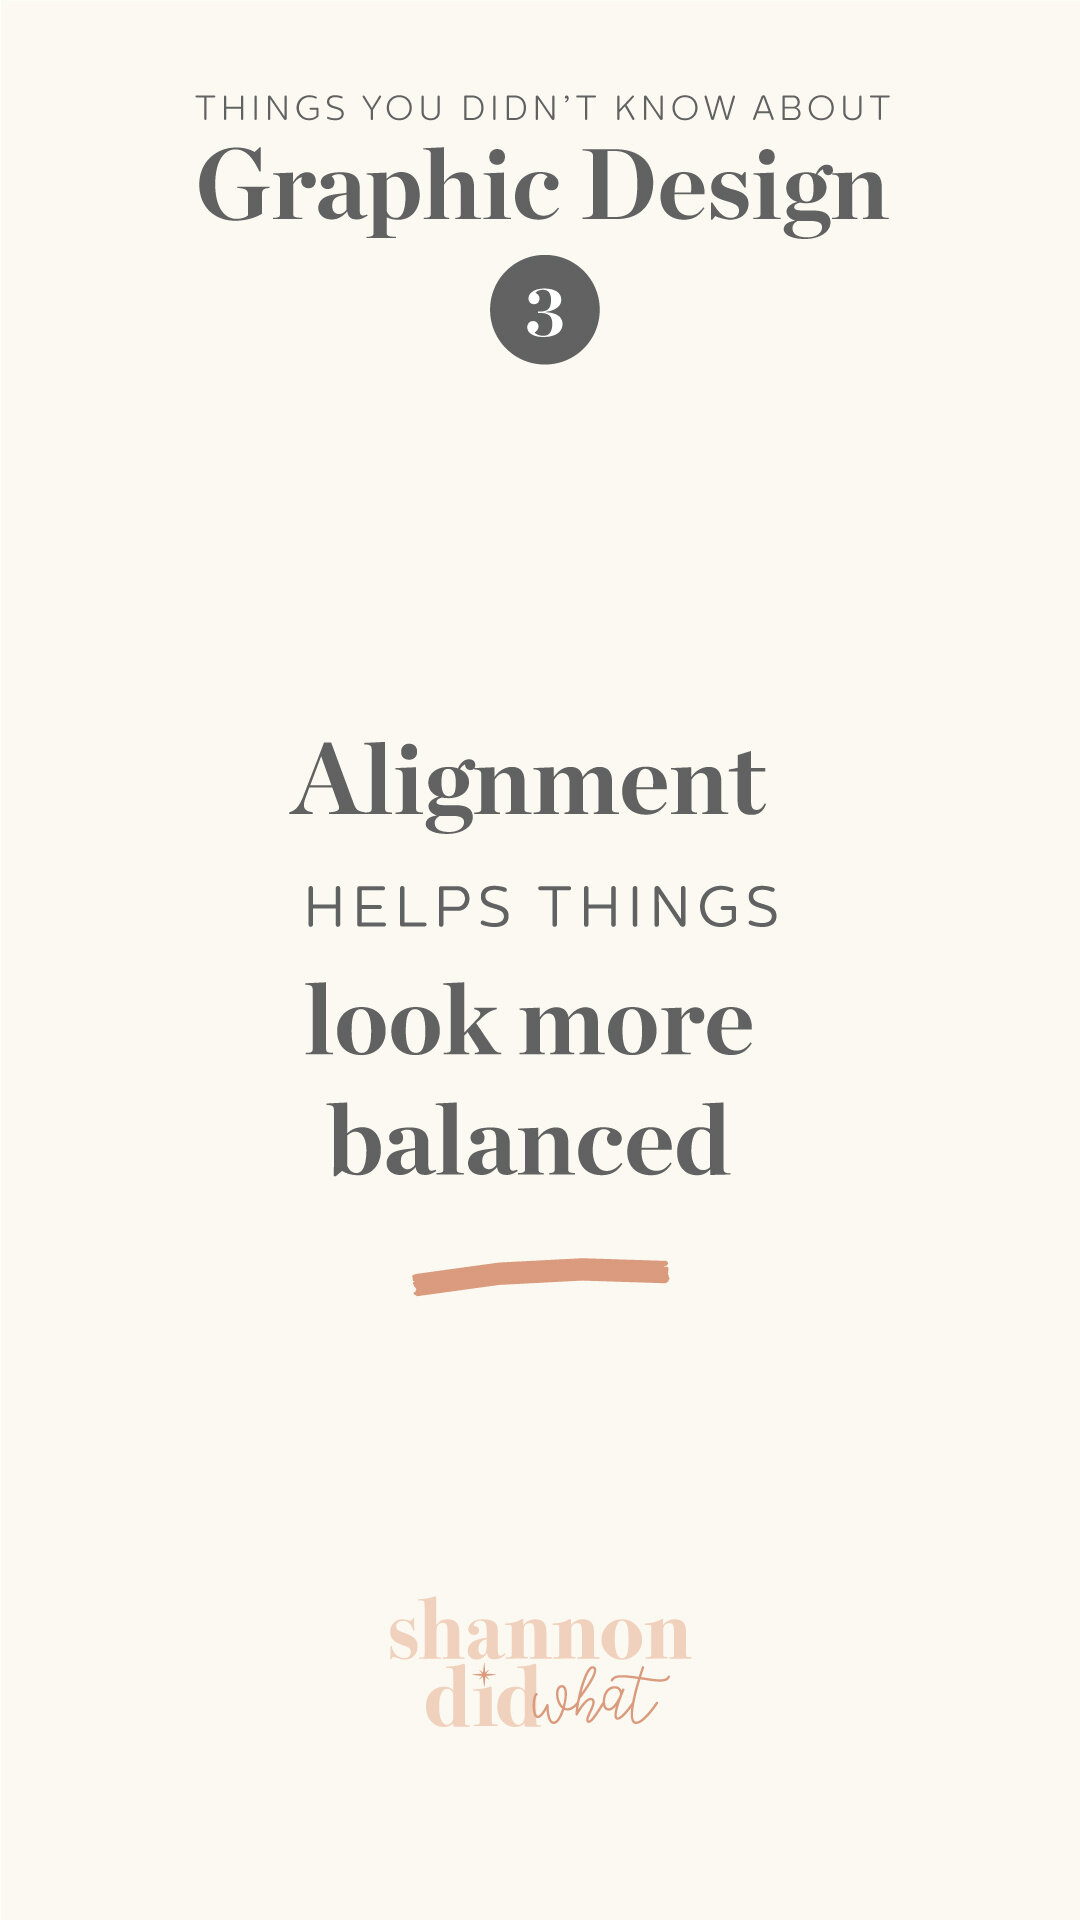 Things you didnt know about Graphic Design  - Alignment helps things look more balanced (Copy) (Copy)